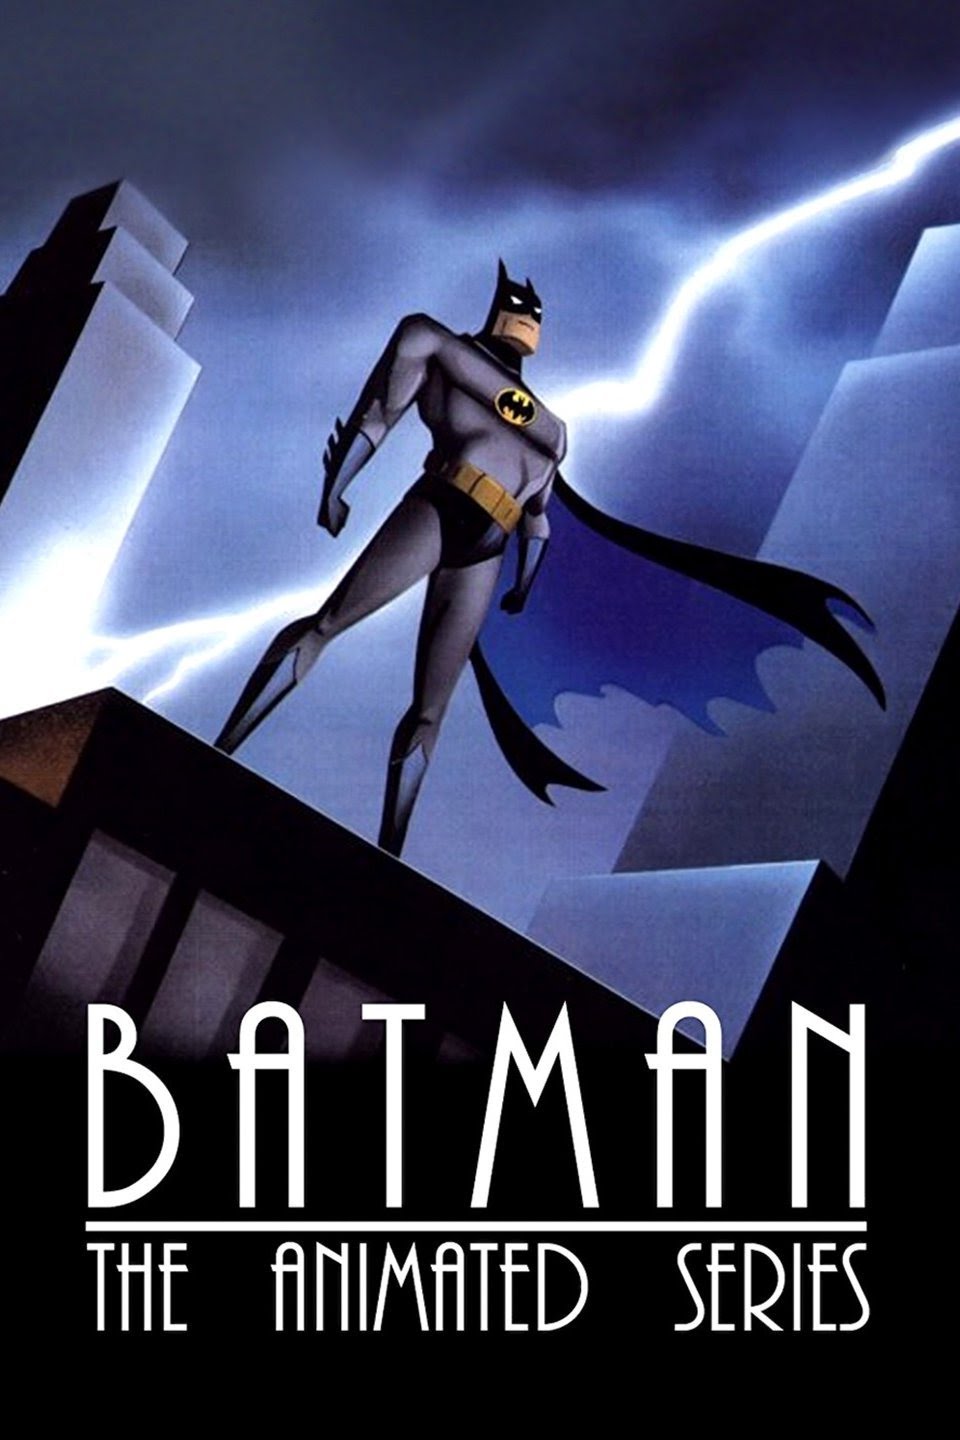 Batman: The Animated Series (1992) Cover by Blue-Leader97 on DeviantArt